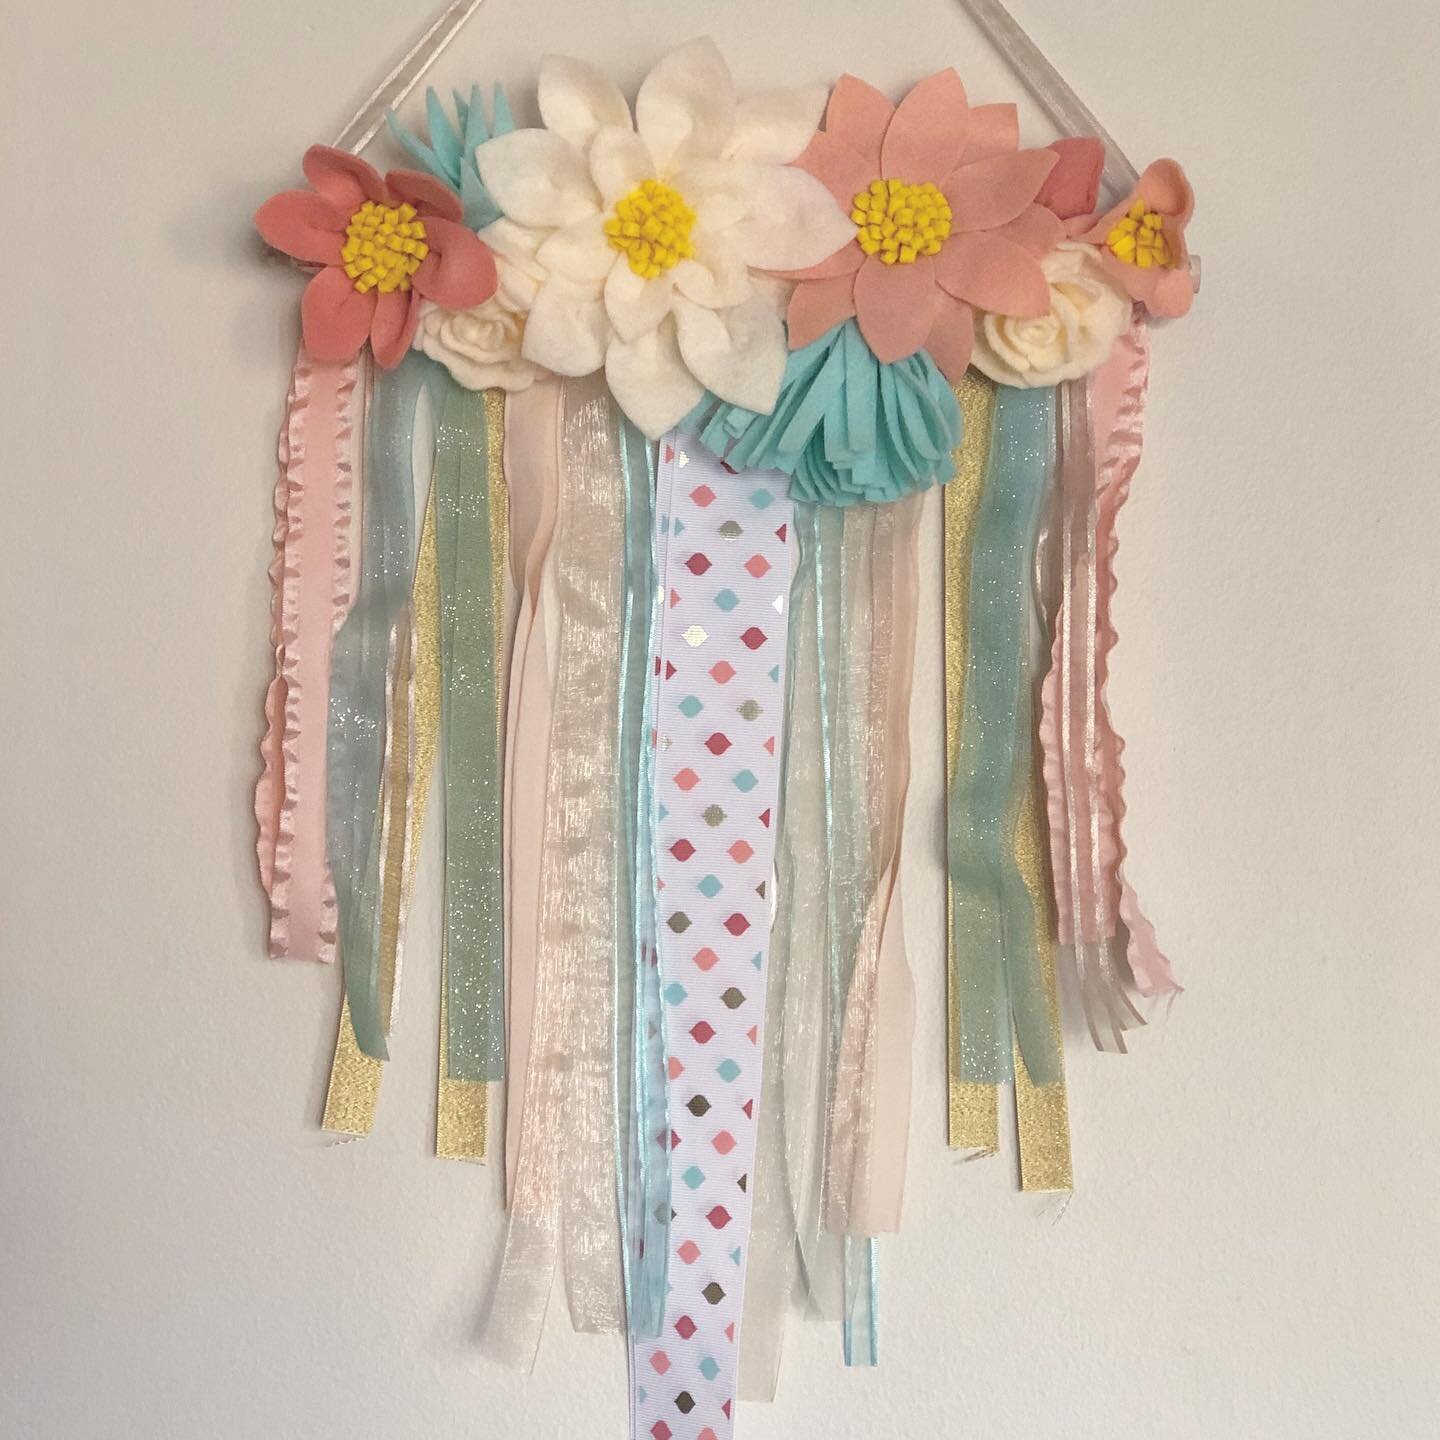 It&rsquo;s never too early to start holiday shopping!! 🥰 
.
🌸 Felt flower and ribbon wall hanging!
.
🌼 24&rdquo;x12&rdquo;
.
🌺 $35.00
.
.
.
Message me for custom orders!!
.
.
.
#ShopSmall #ShopLocal #Handmade #Homemade #MadeWithLove